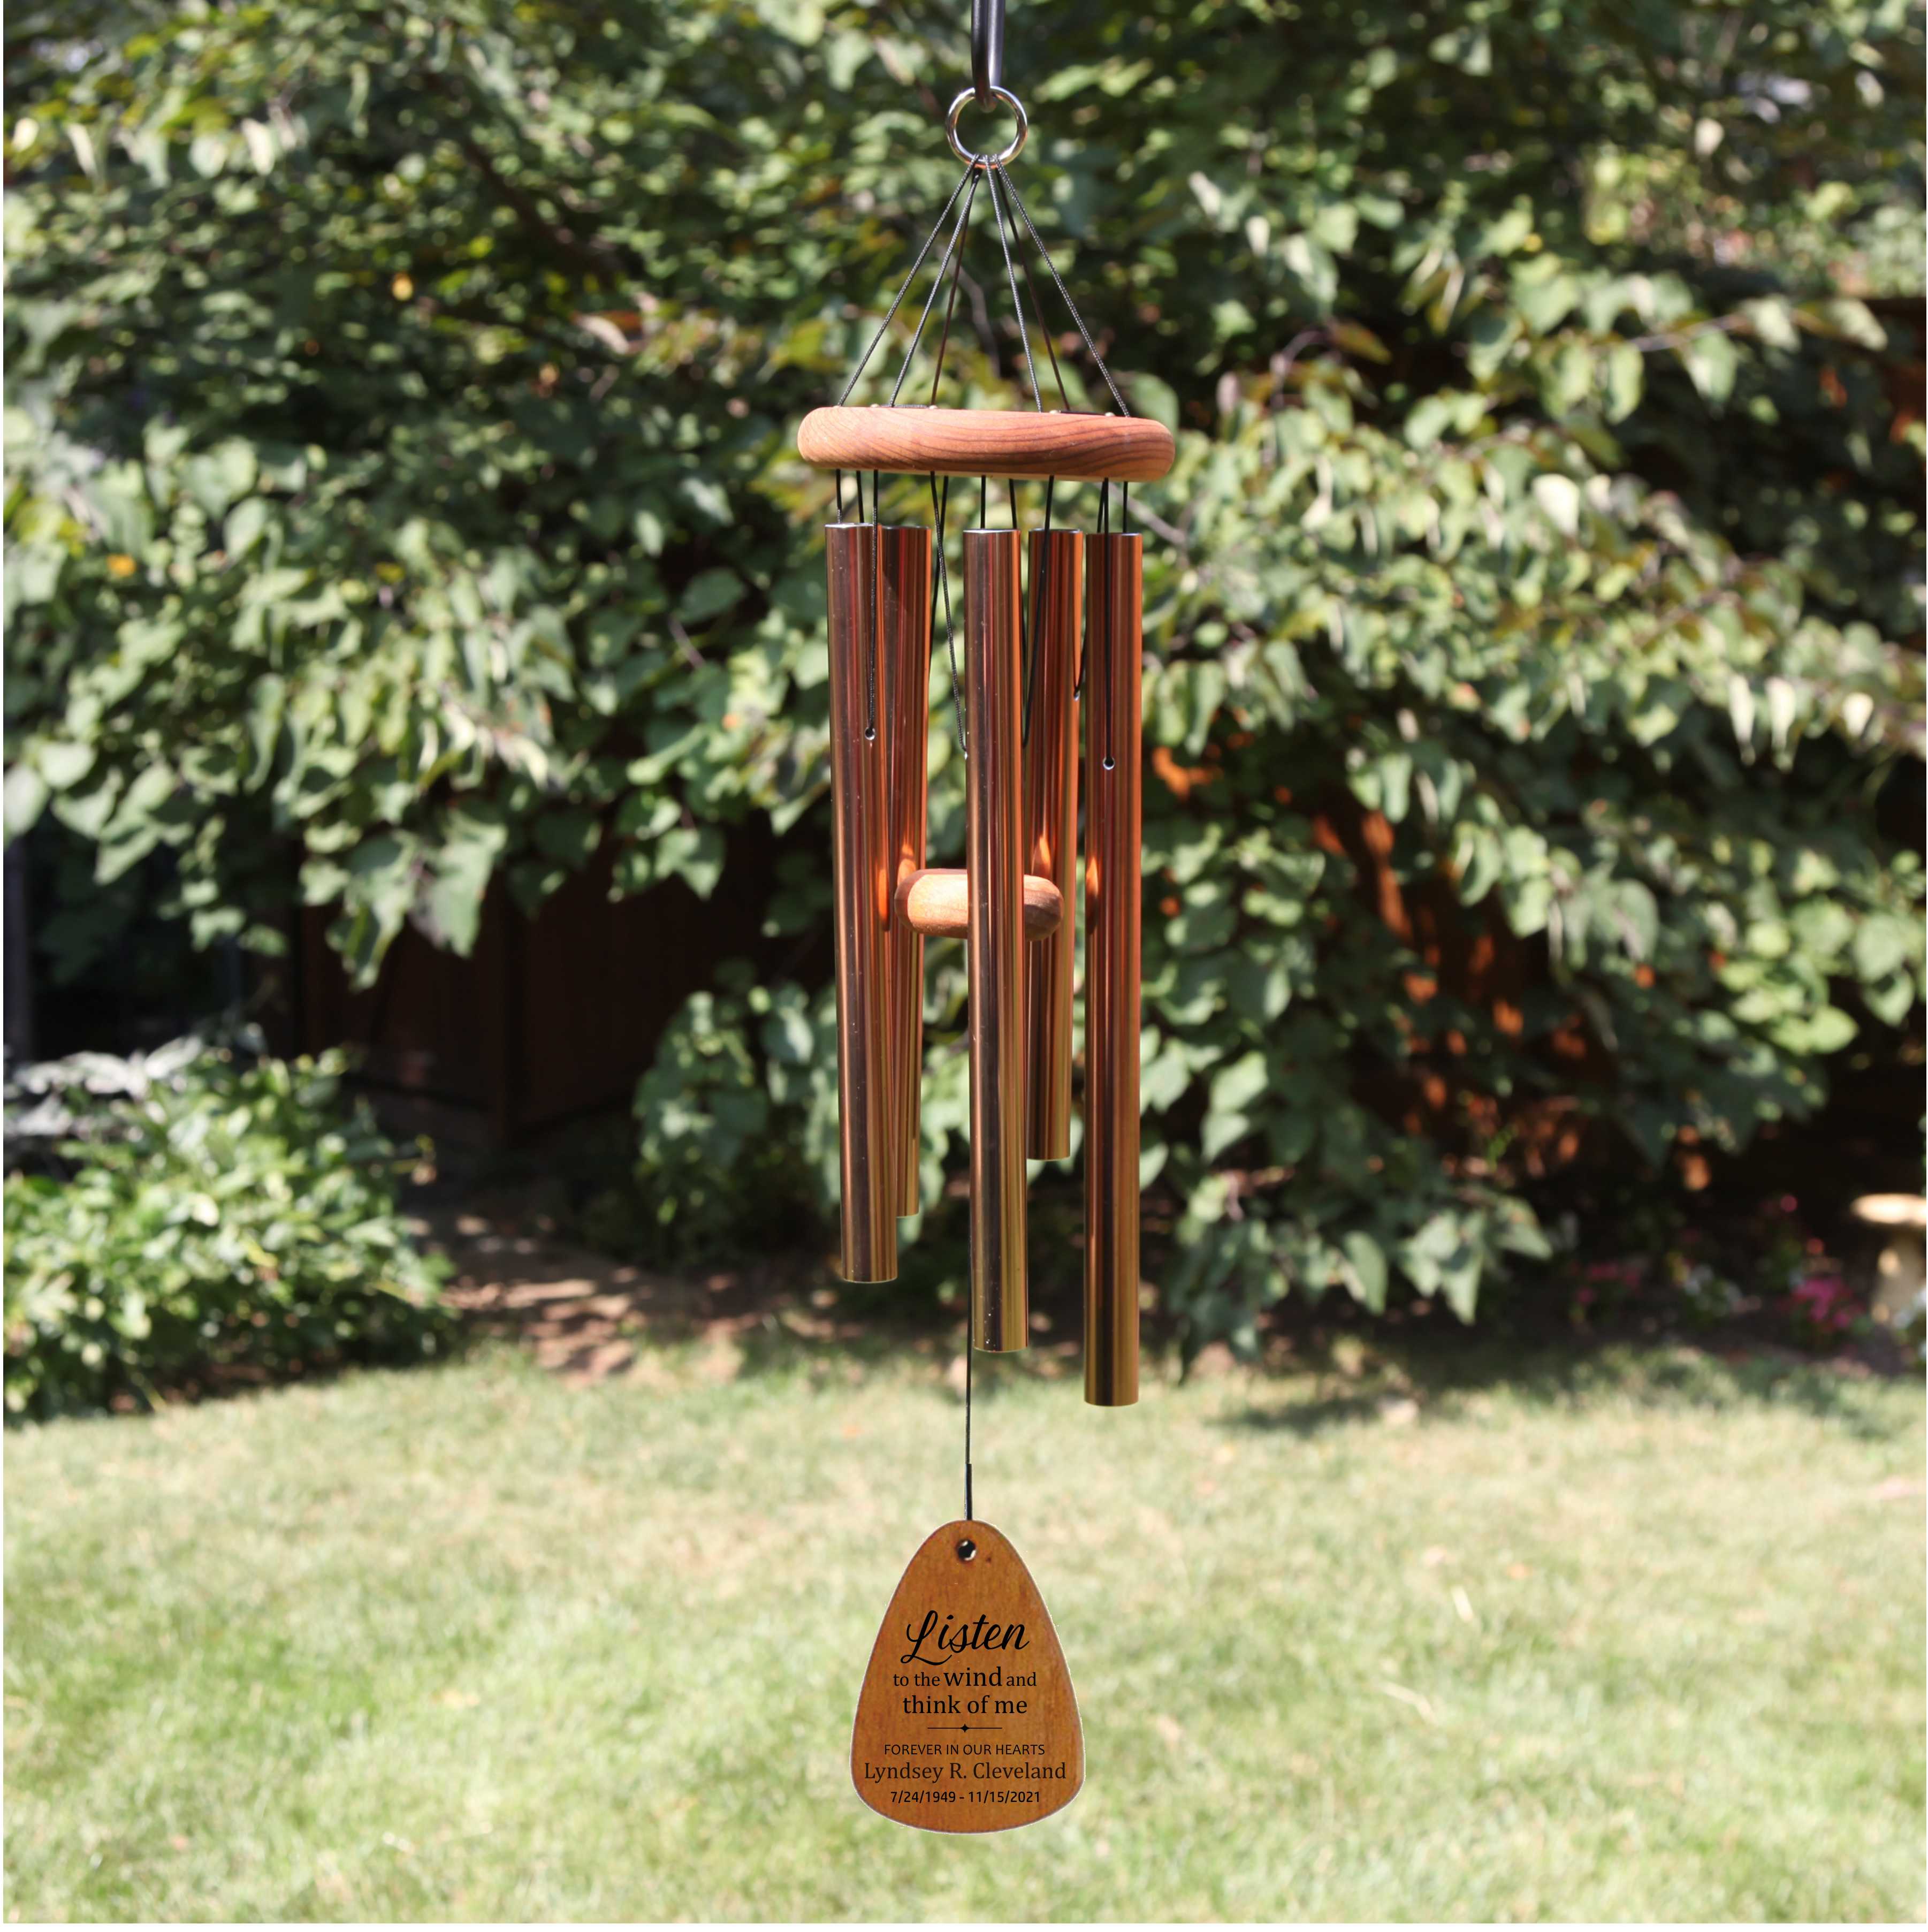 Listen to the Wind and Think of Me | Personalized Memorial Wind Chime | Sympathy Gift | Made in USA